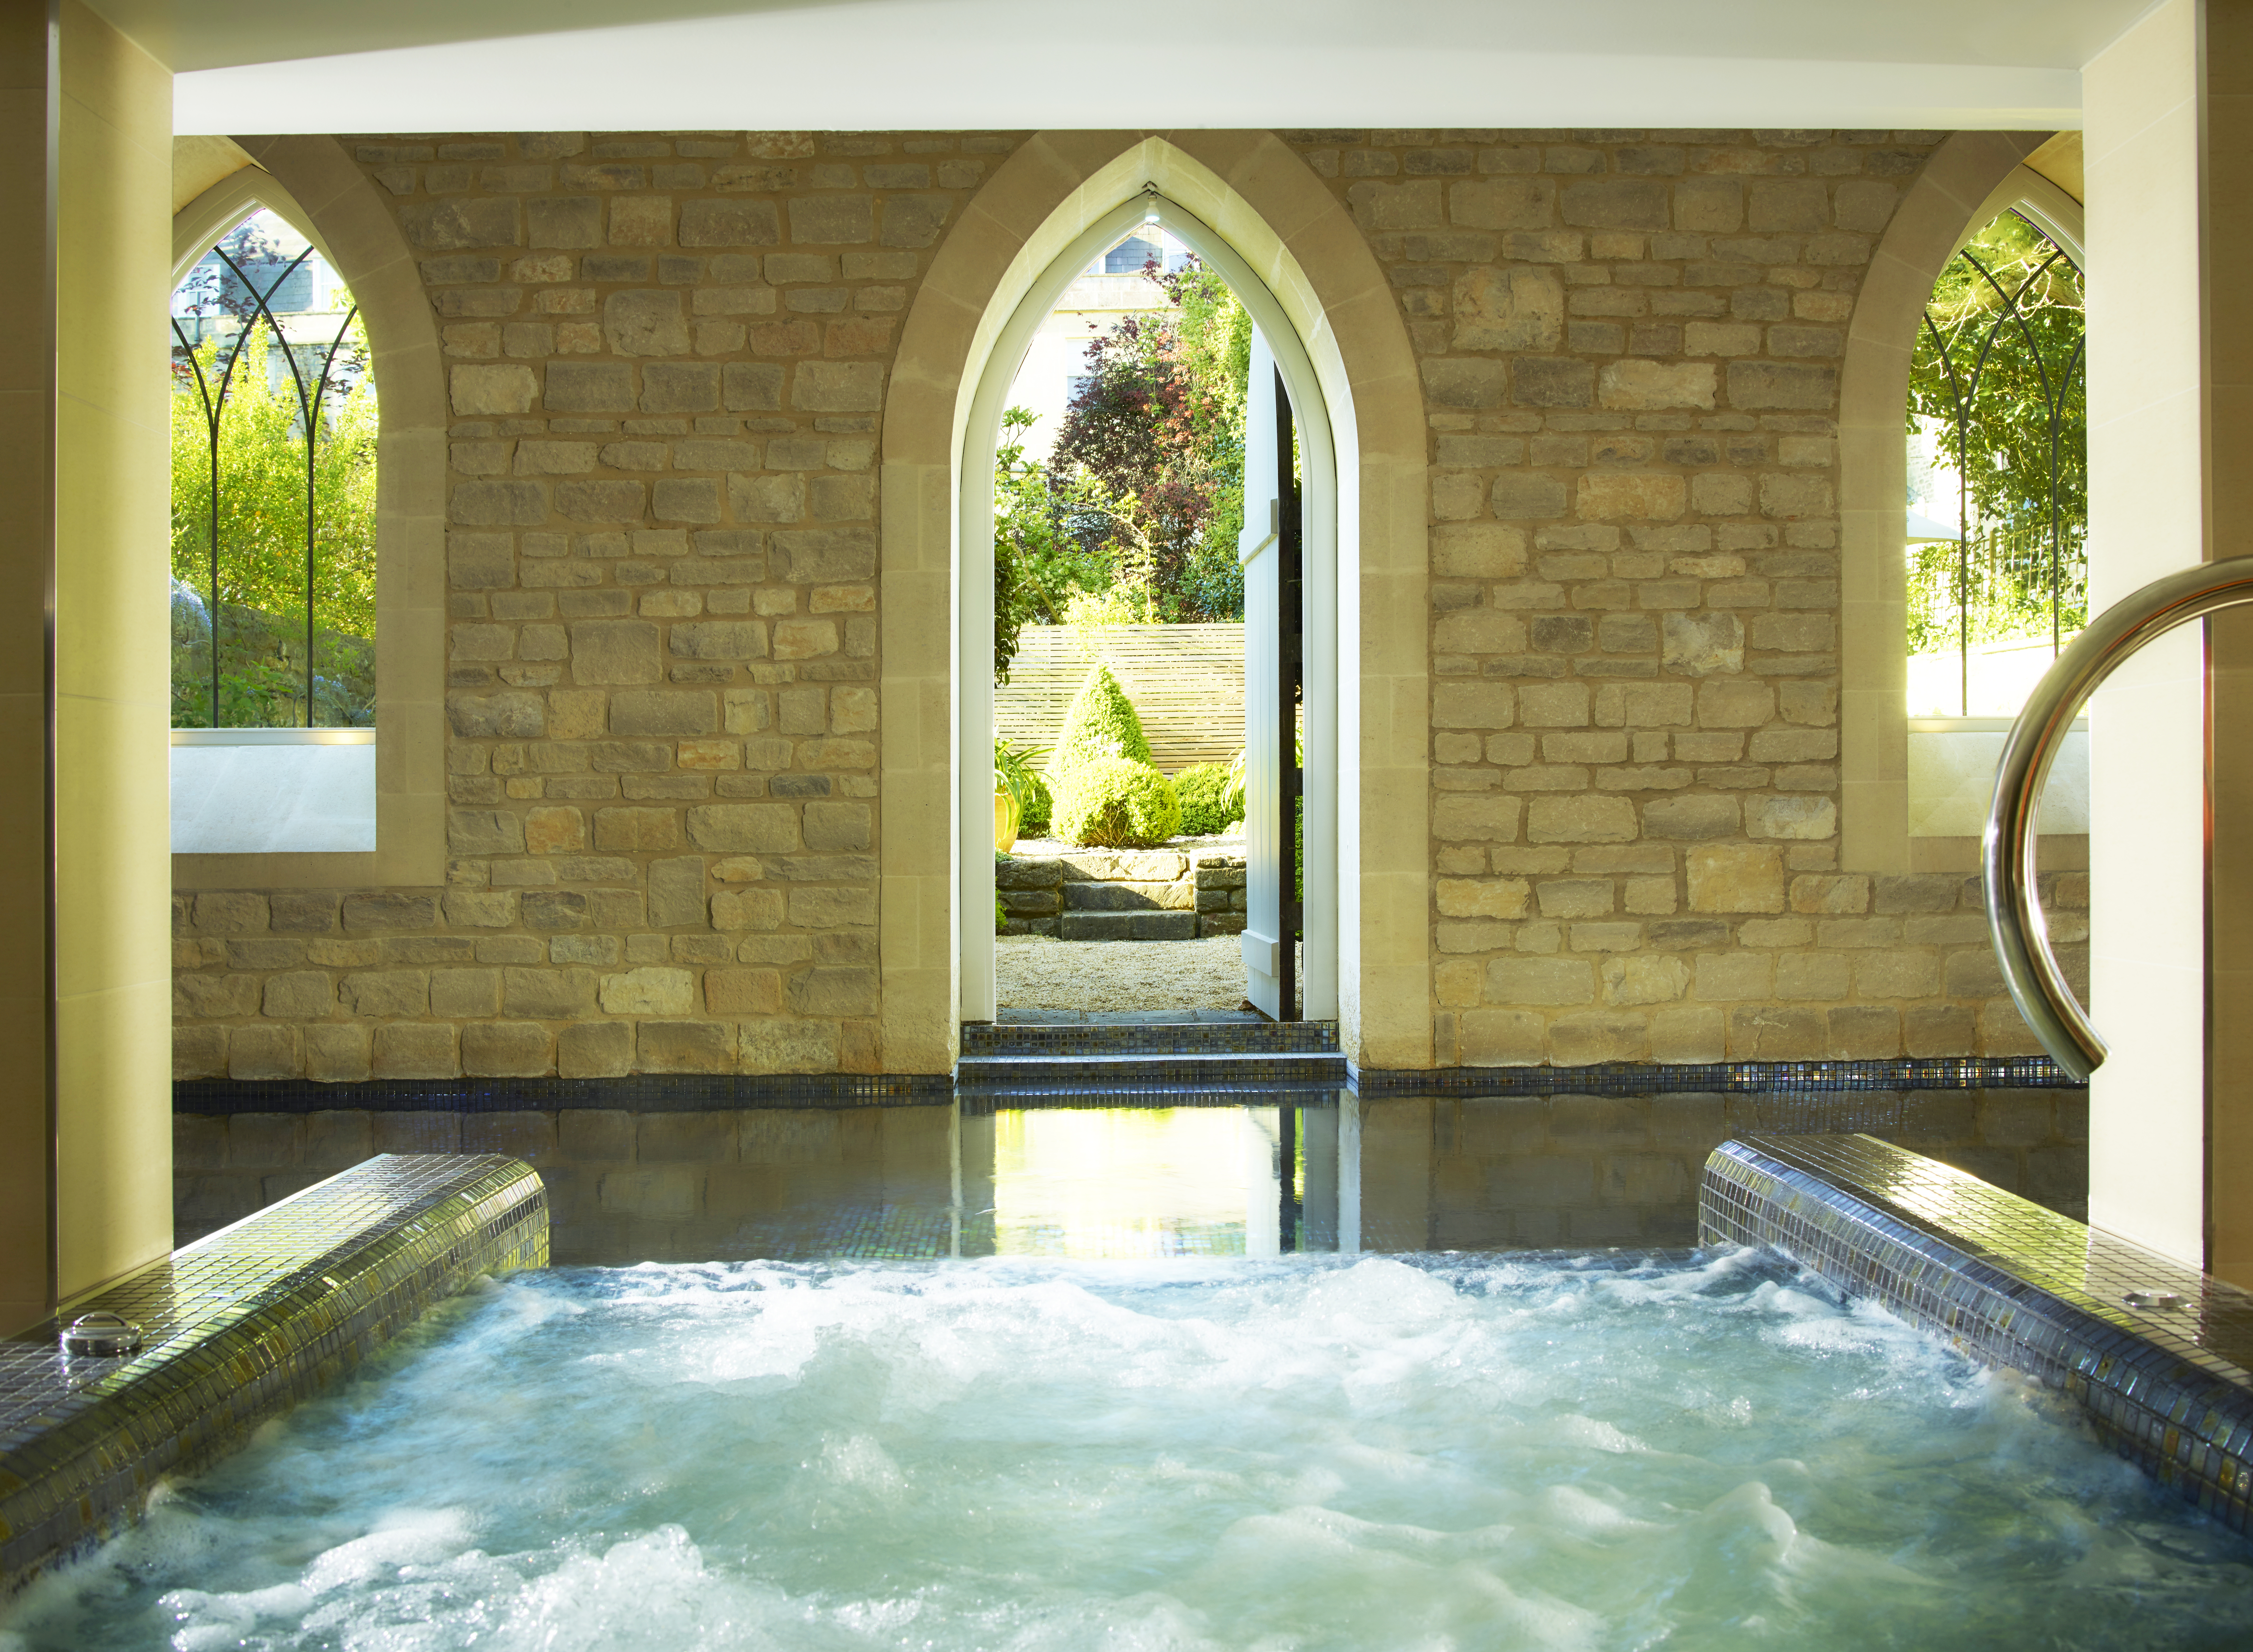 The Half Day Royal Crescent Spa Retreat, The Royal Crescent Hotel And